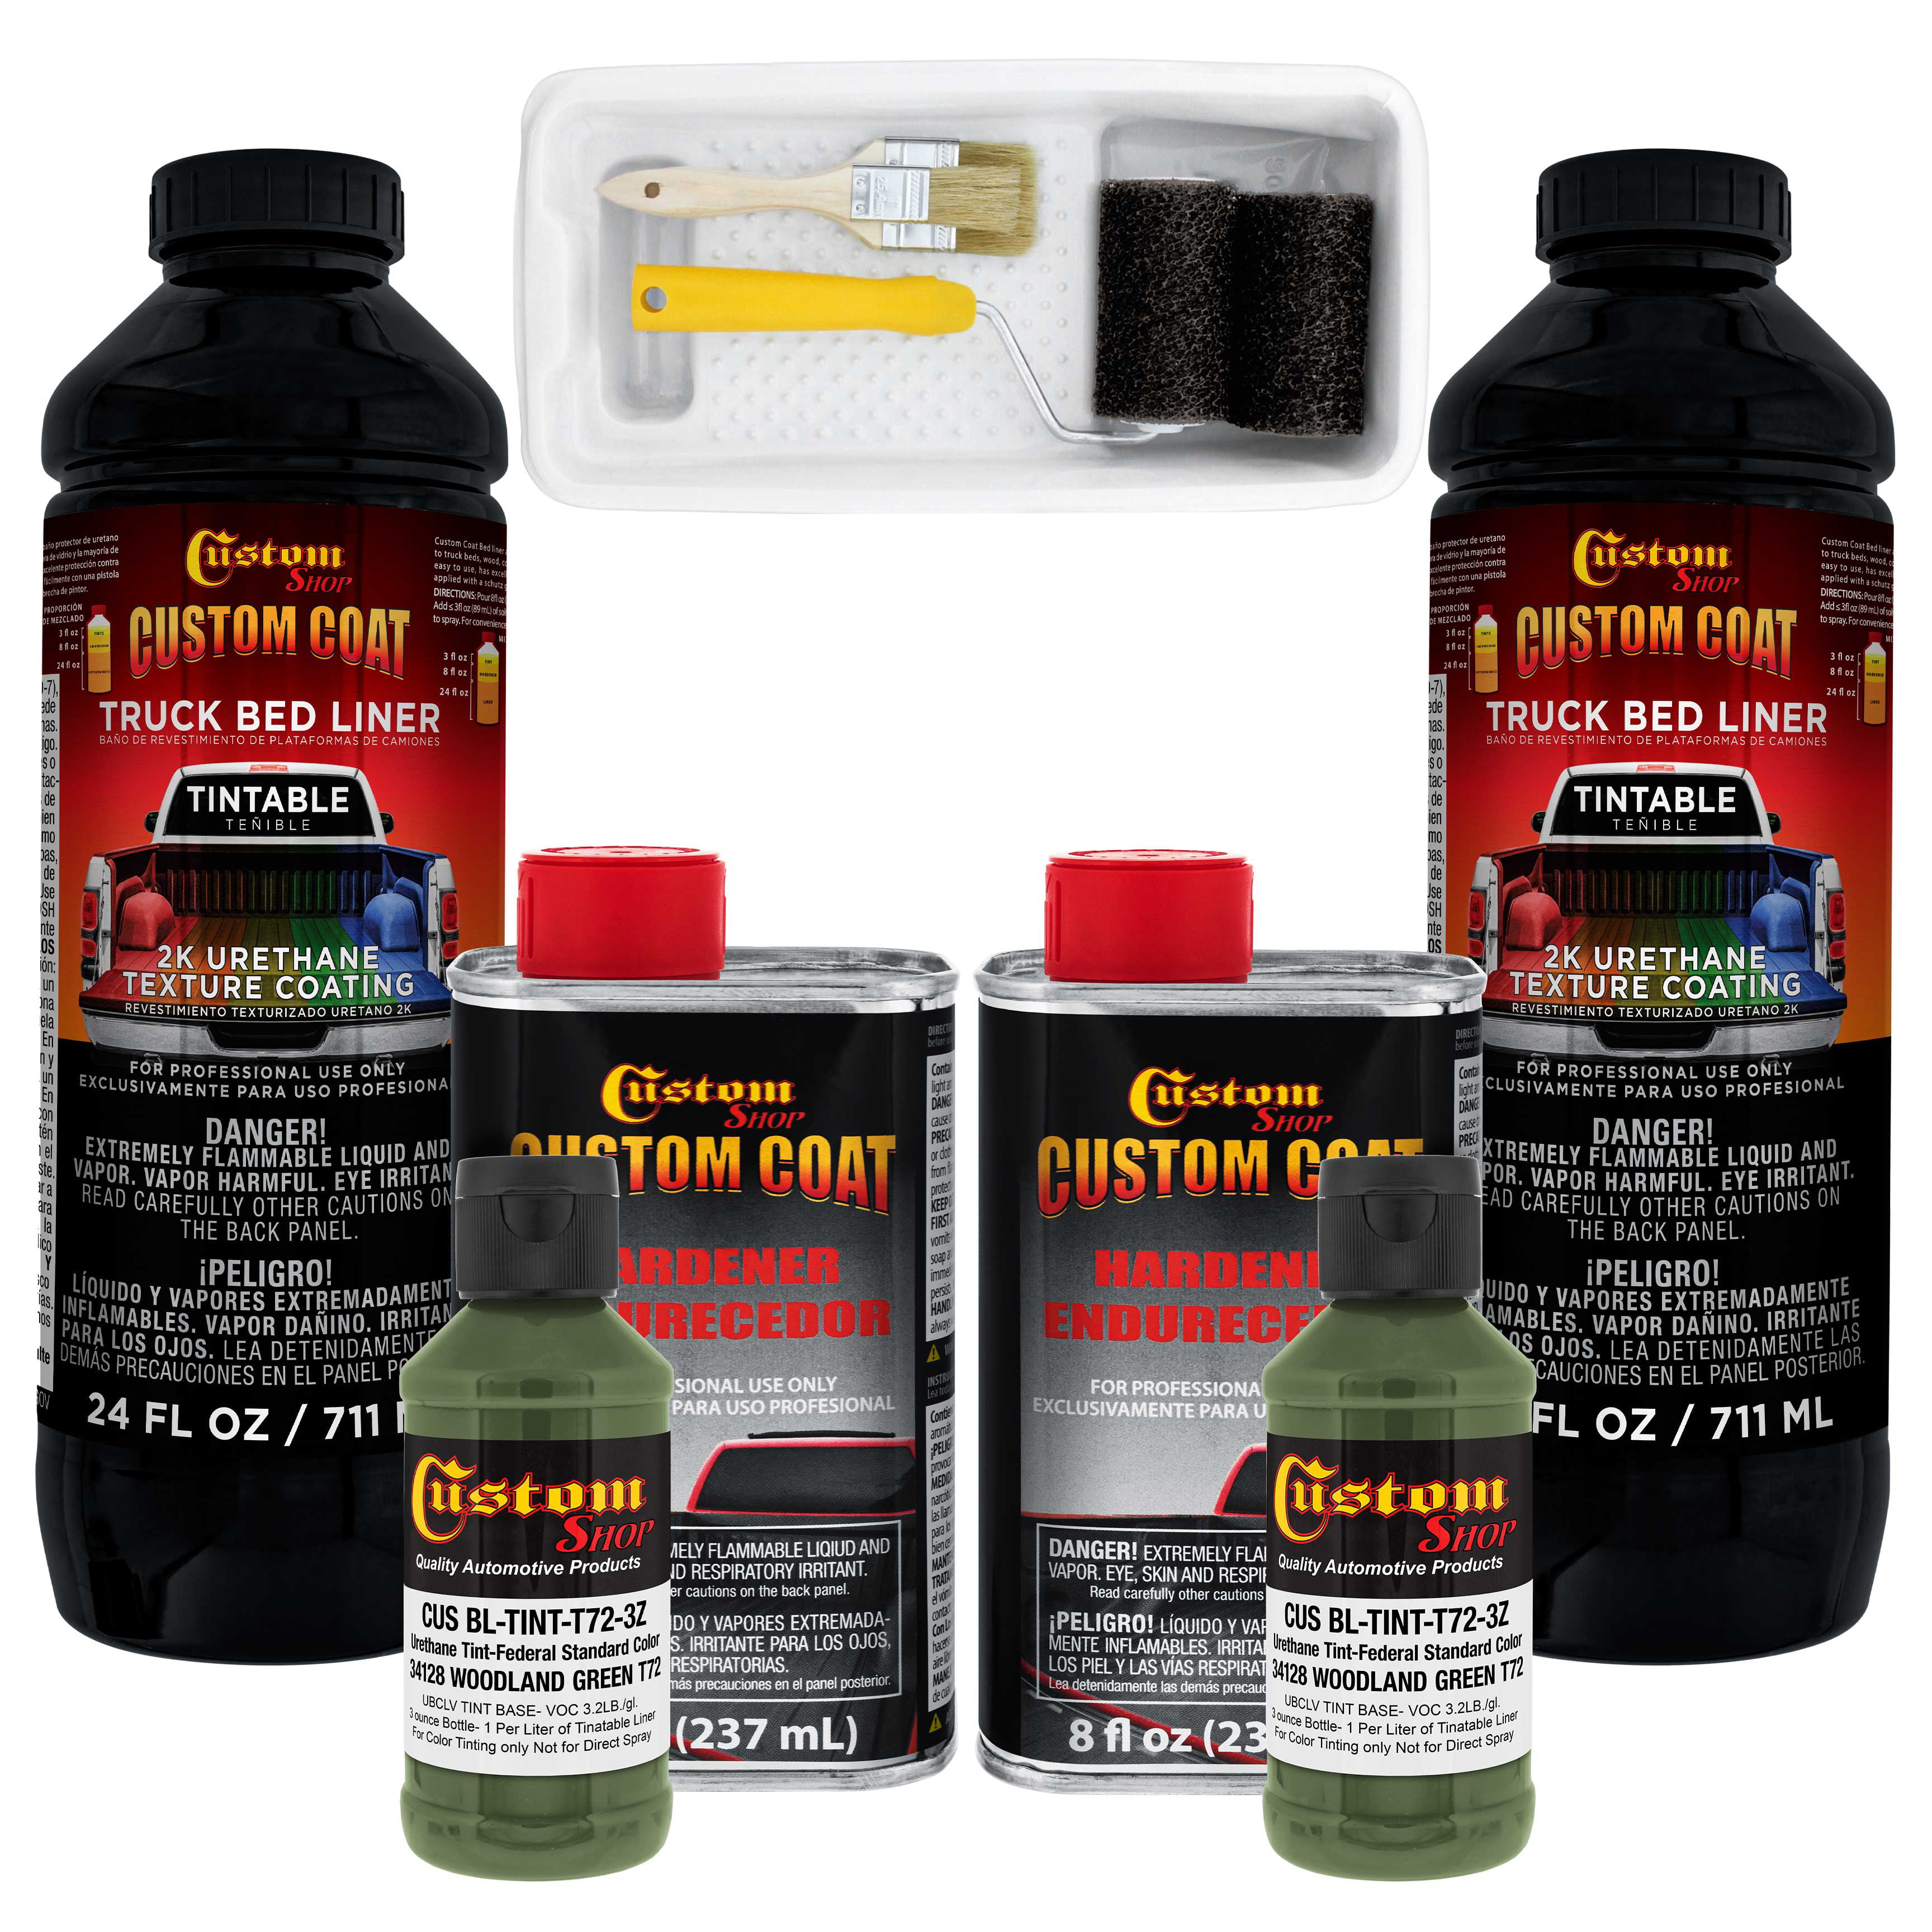 Custom Coat Federal Standard Color # 34128 Woodland Green T72 Urethane Roll-On Brush-On or Spray-On Truck Bed Liner Textured Car Auto Protective Coating 2 Quart Kit with Roller Applicator Kit 